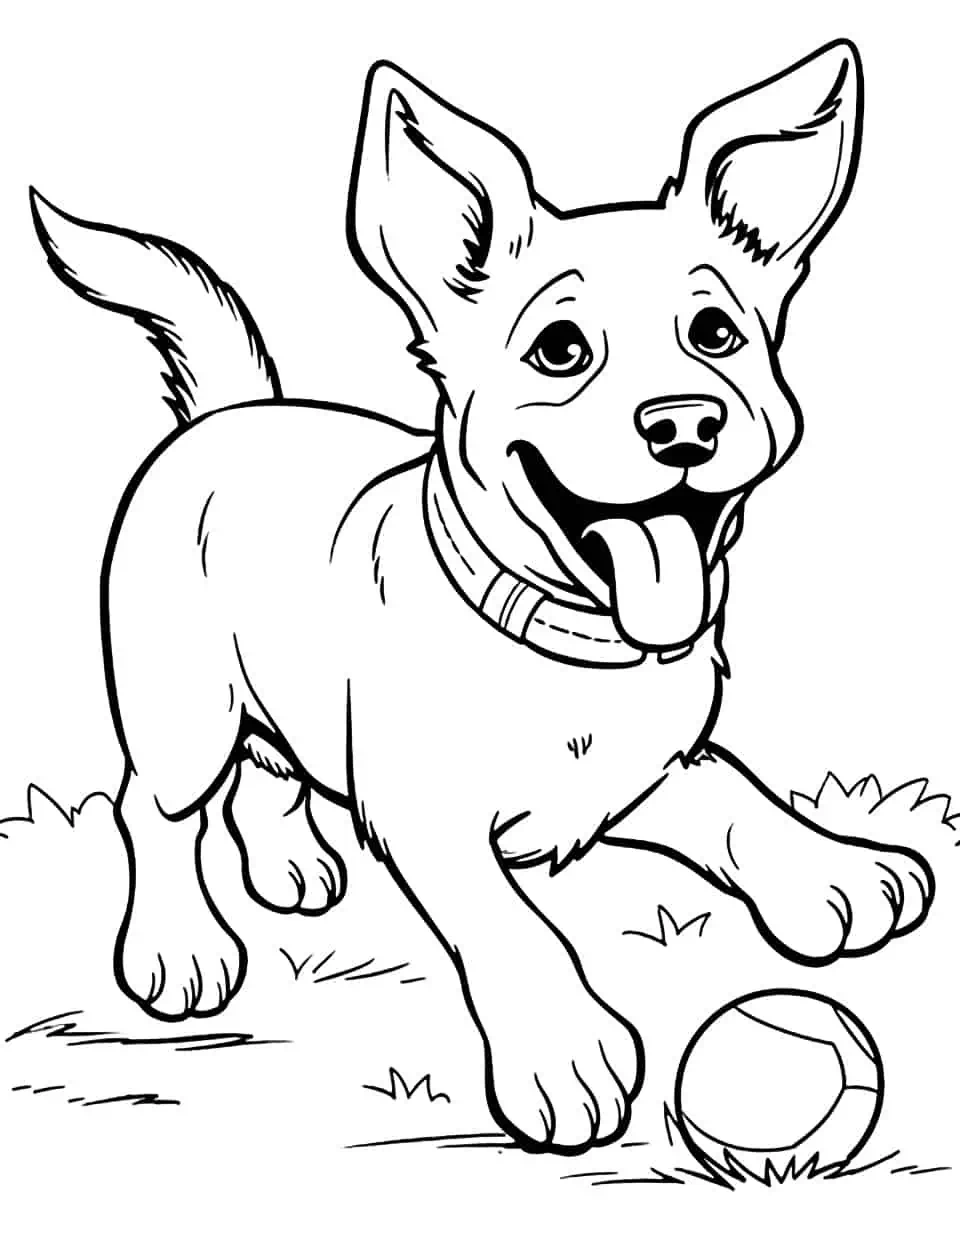 Playful German Shepherd Coloring Page - An easy-to-color image of a playful German Shepherd chasing a ball.